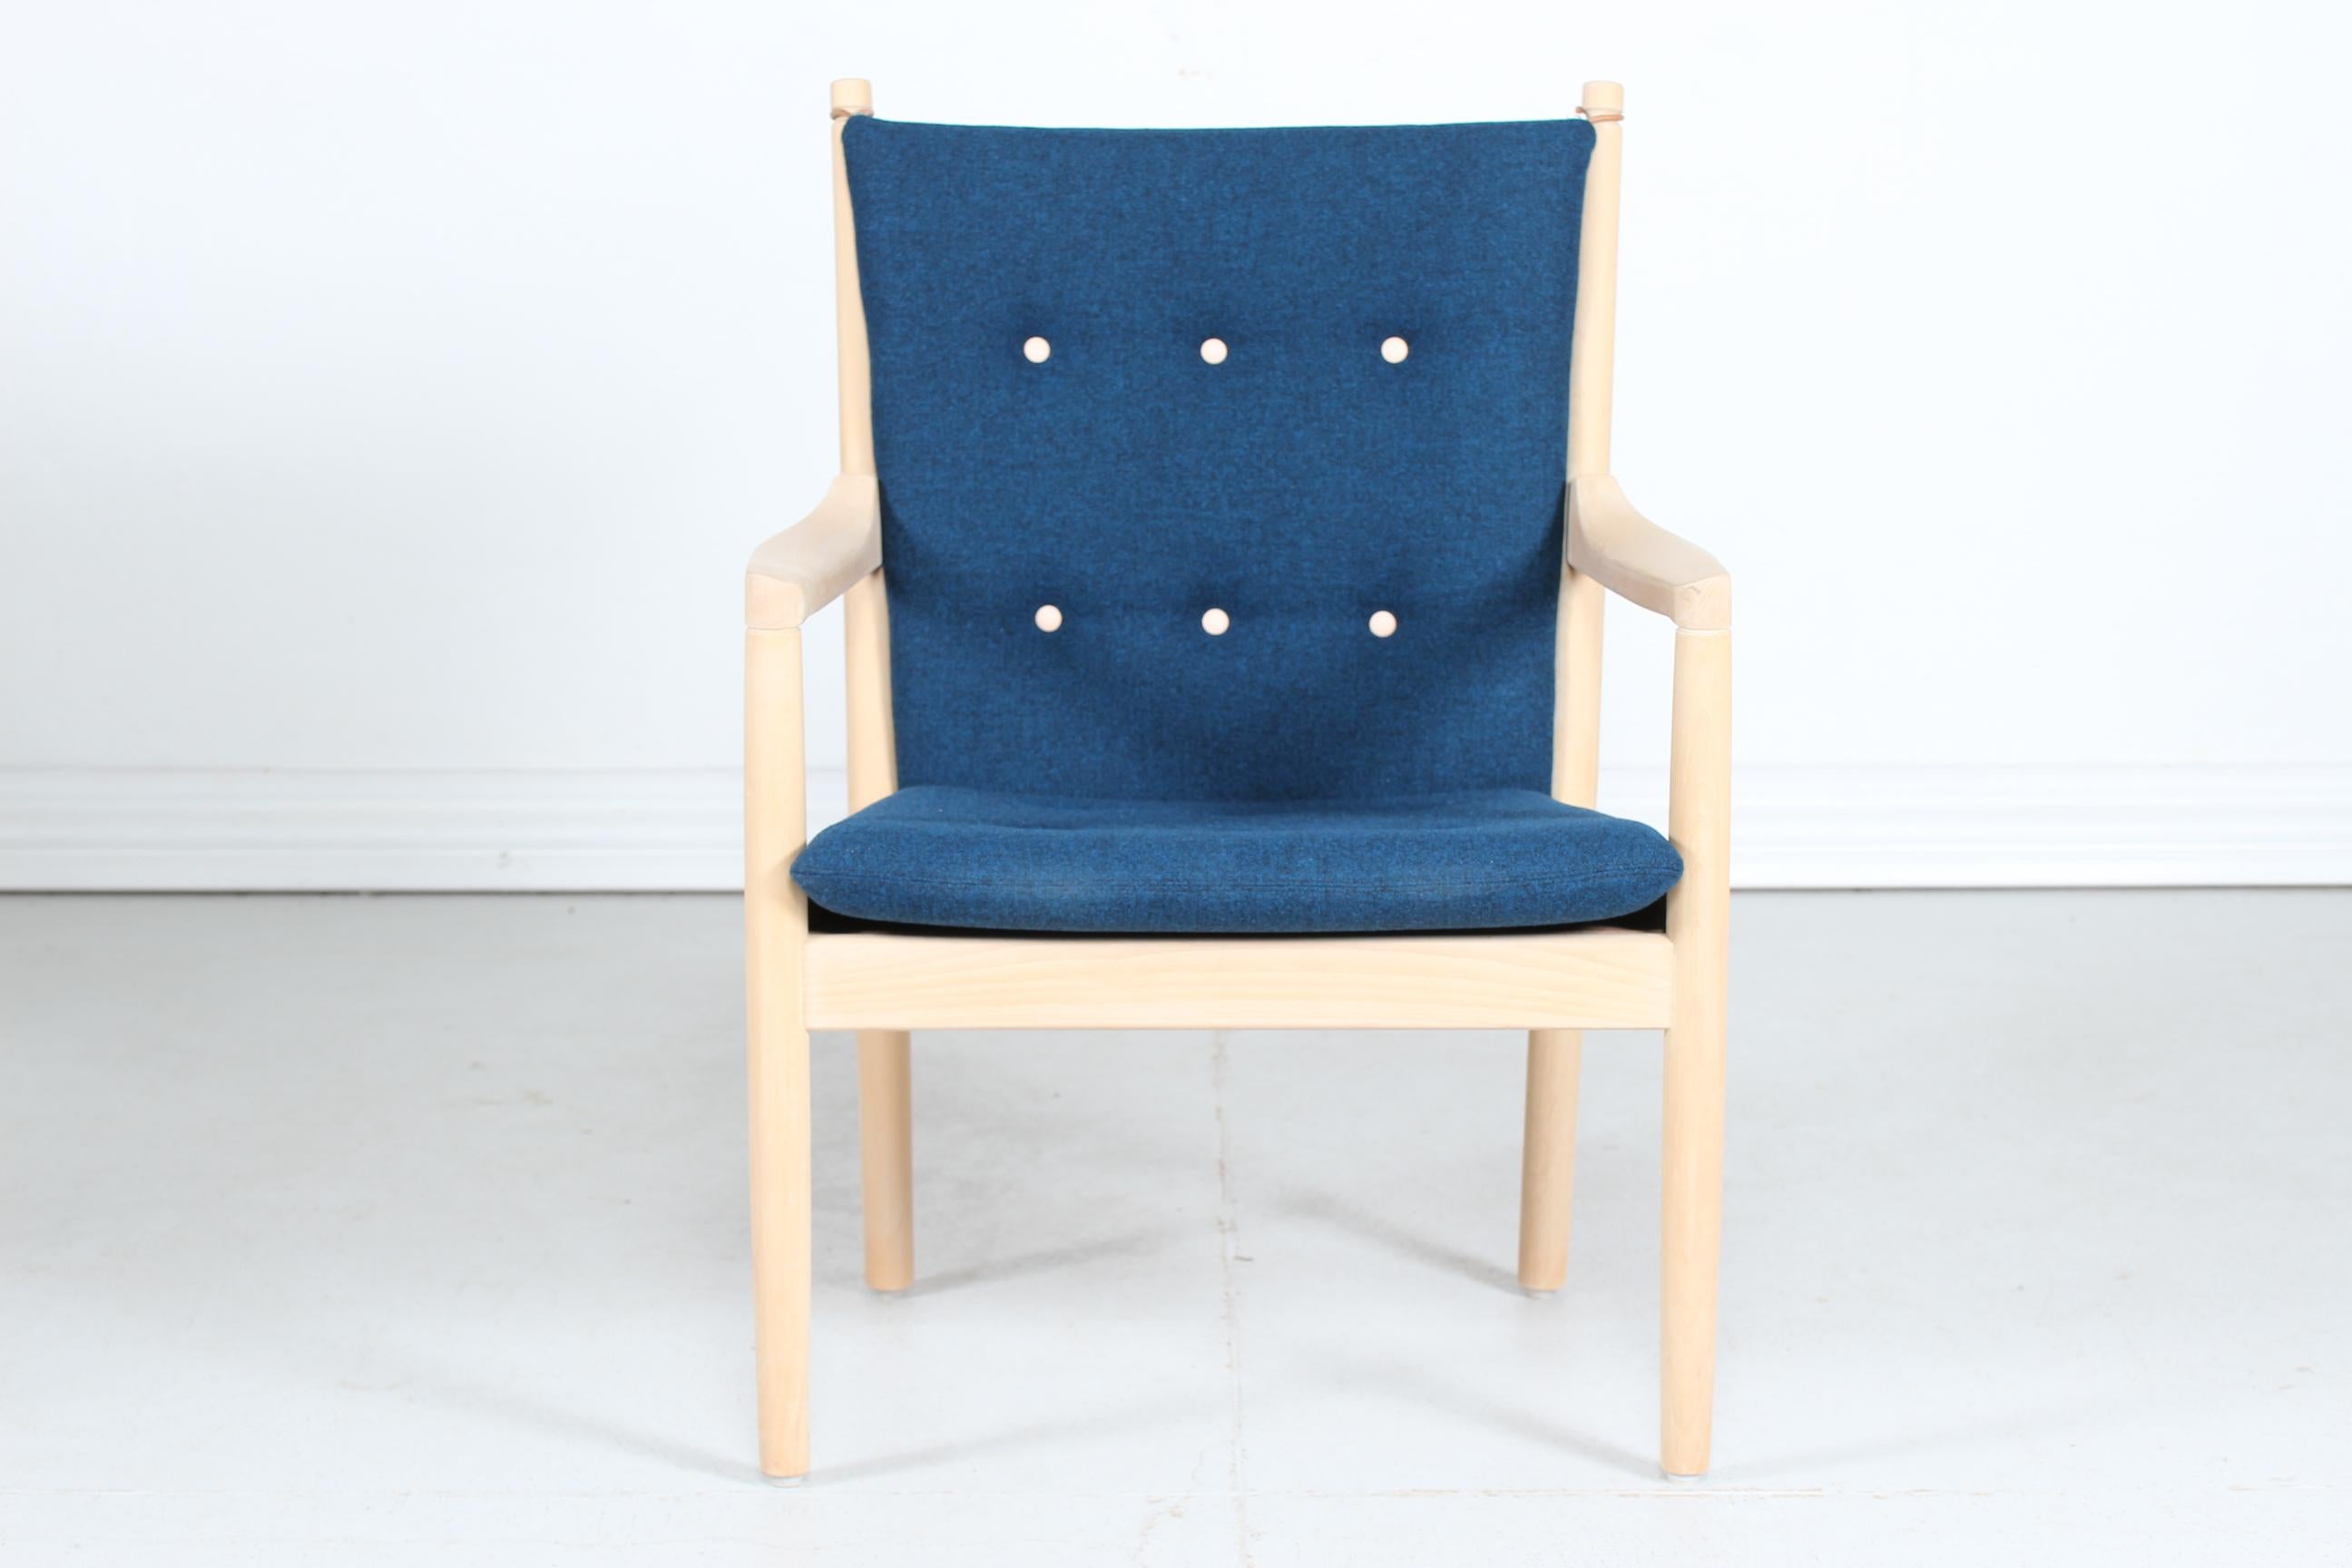 Easy chair model no. 1788 by Danish architect and cabinetmaker Hans J. Wegner (1914-2007) manufactured by Fritz Hansen A/S in 1986

The chair, which is designed to match Børge Mogensen's spoke back sofa model no 1789, is made of solid beech wood